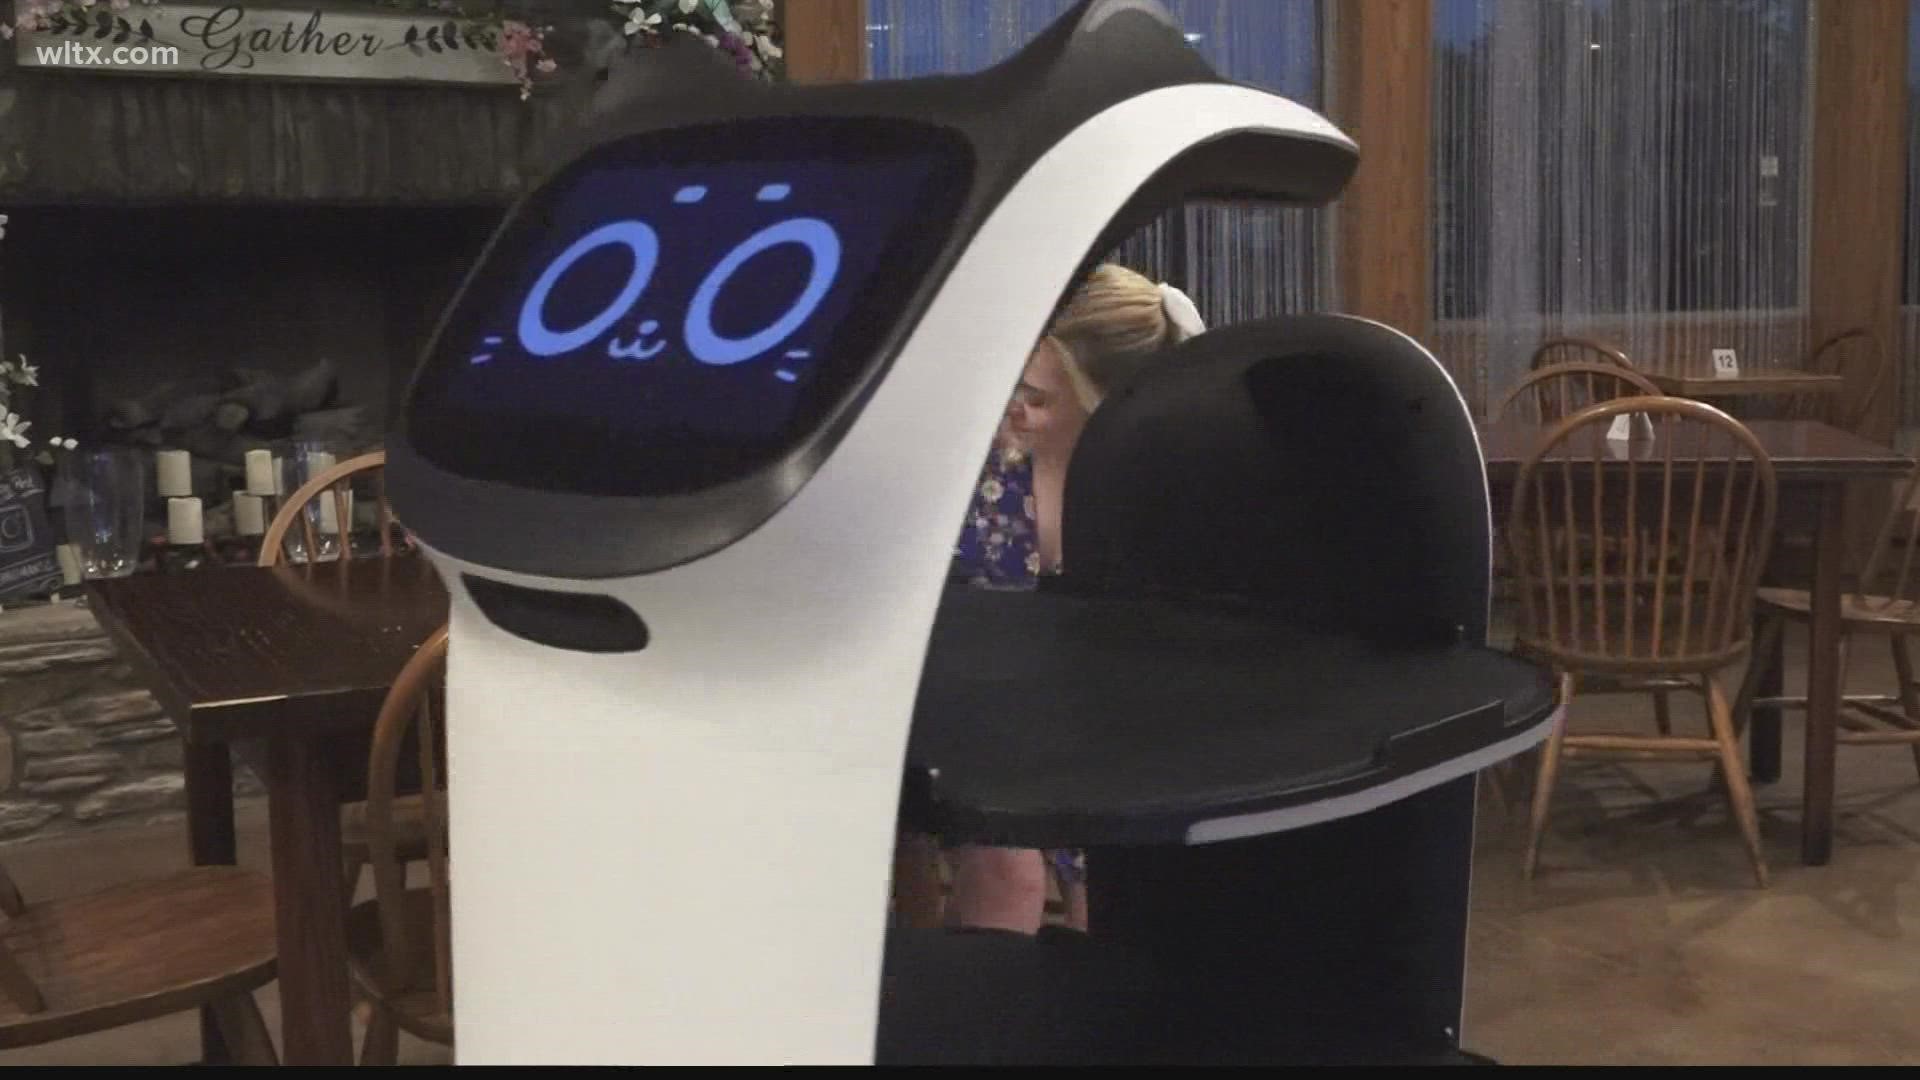 The Peanut Man Gourmet Café has just hired a new robot server to help bring customers their food.